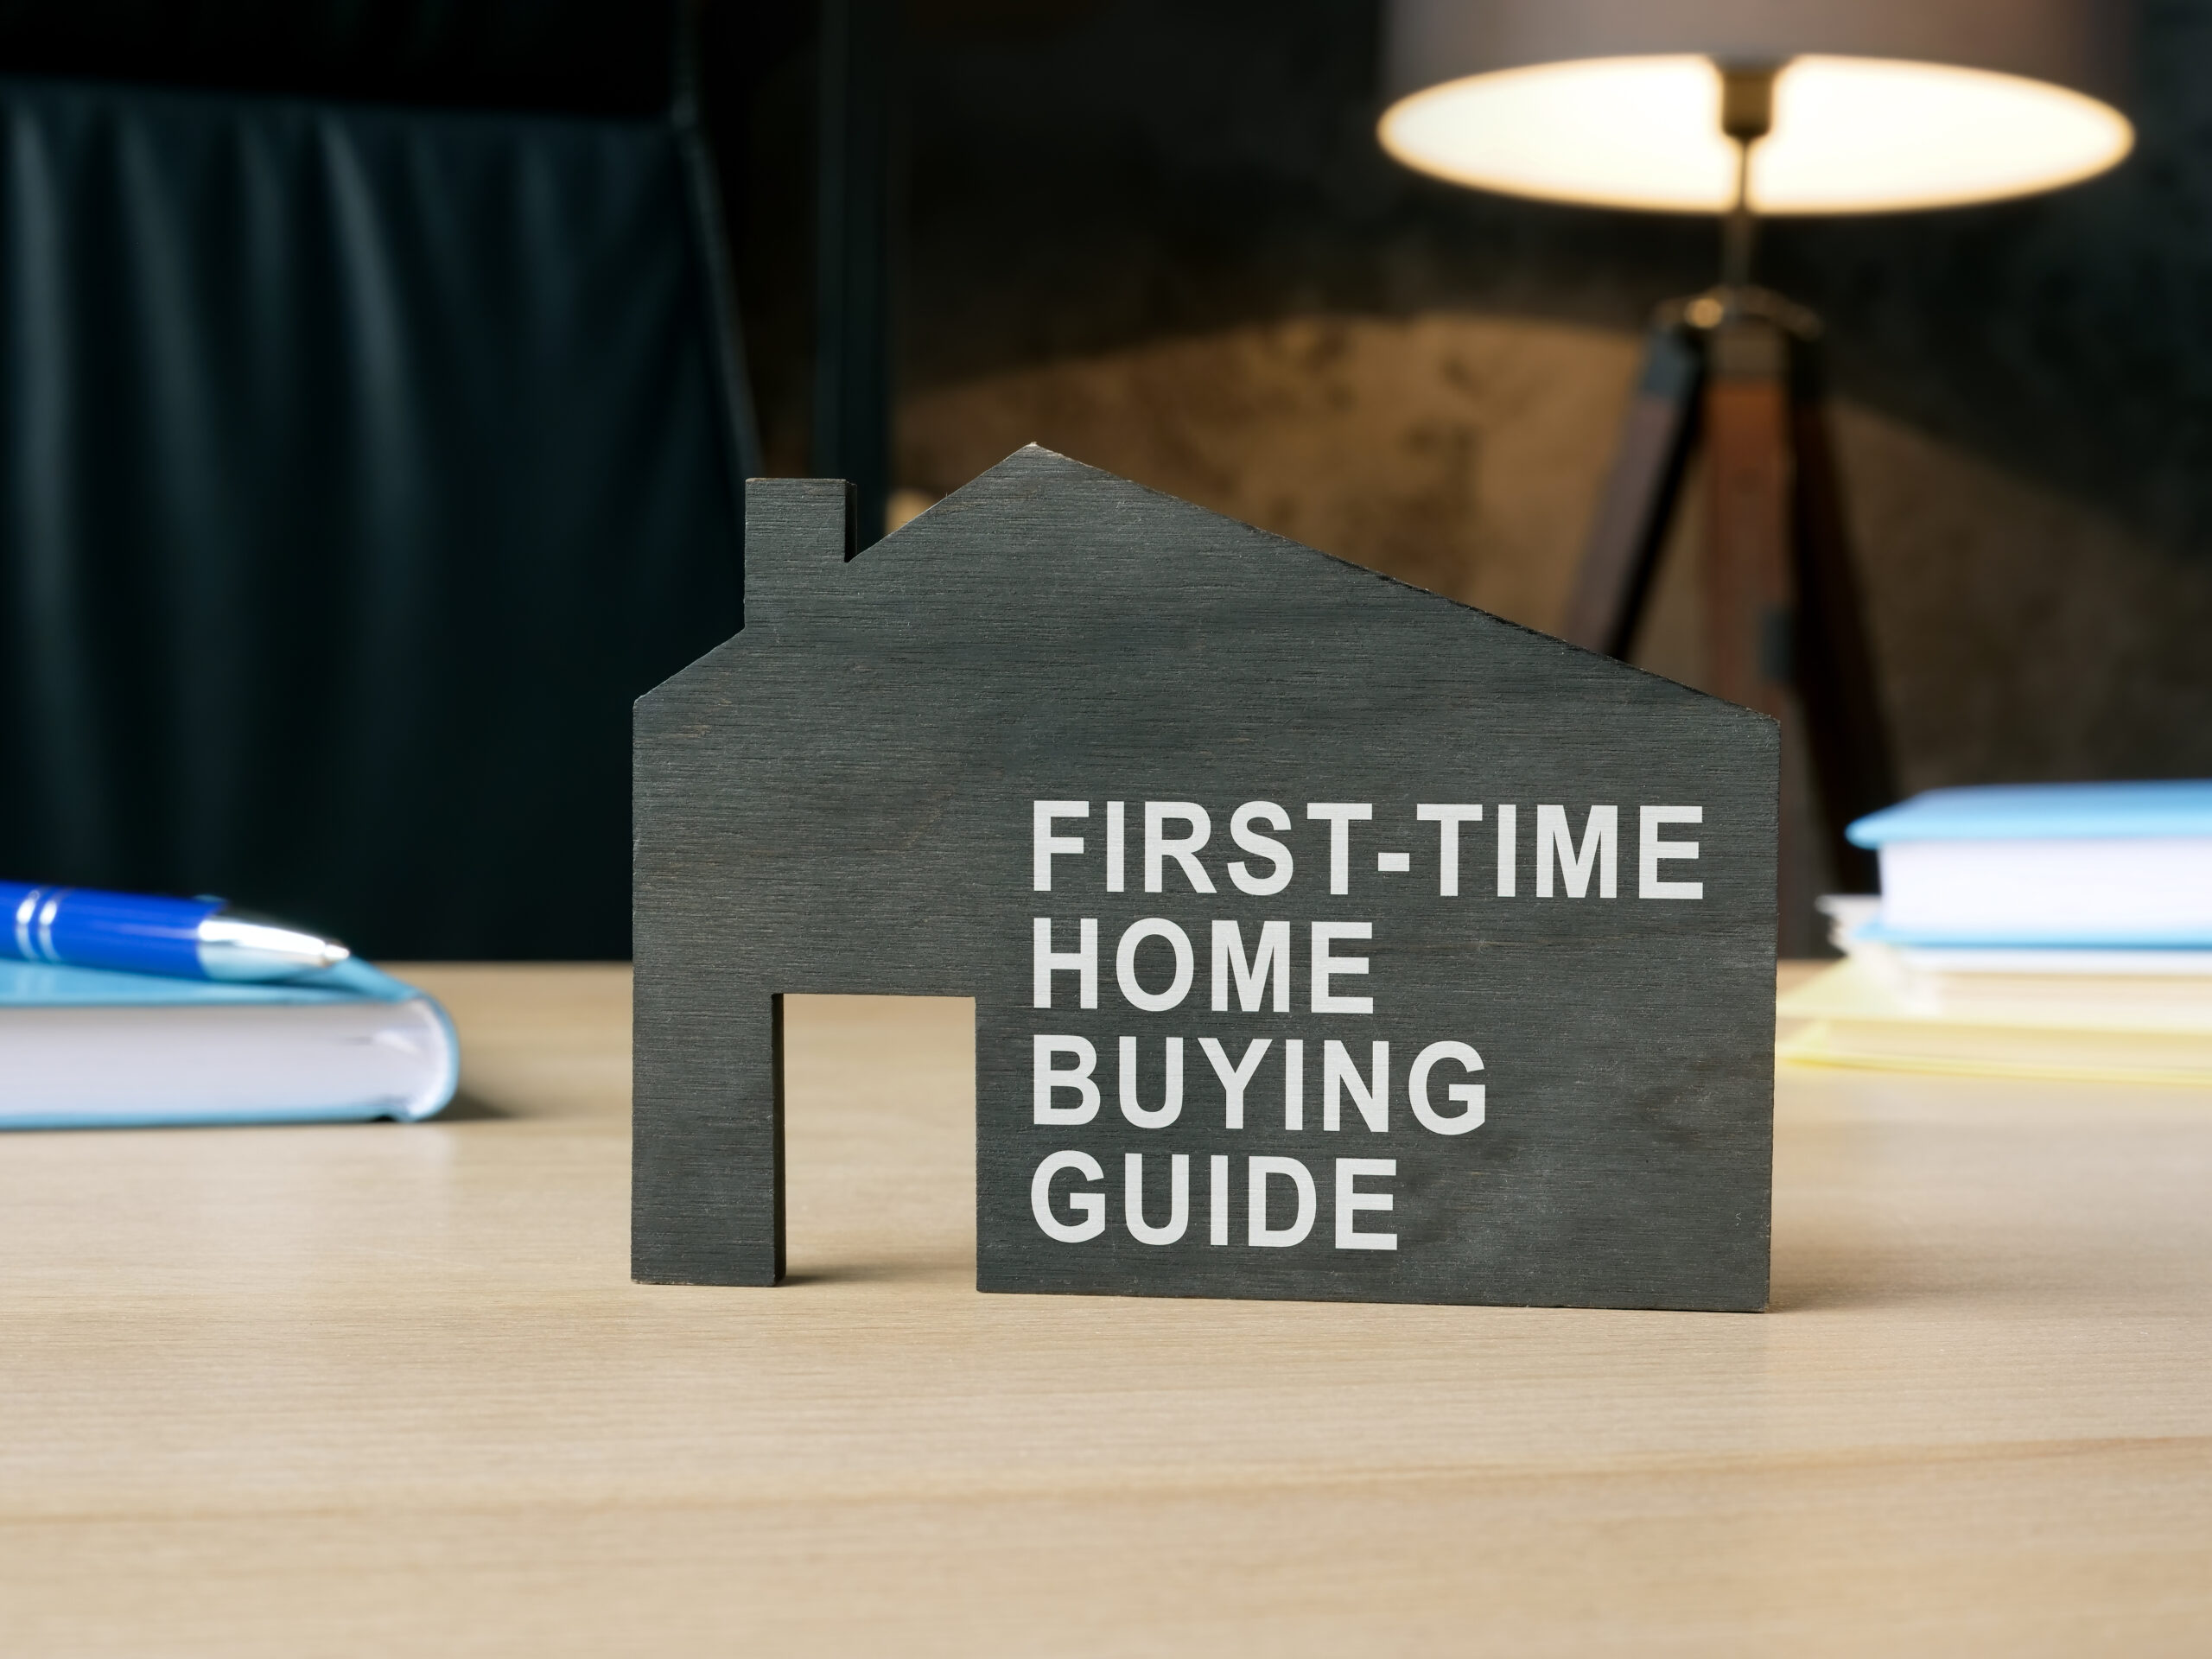 Dark model of home with sign first-time home buying guide.